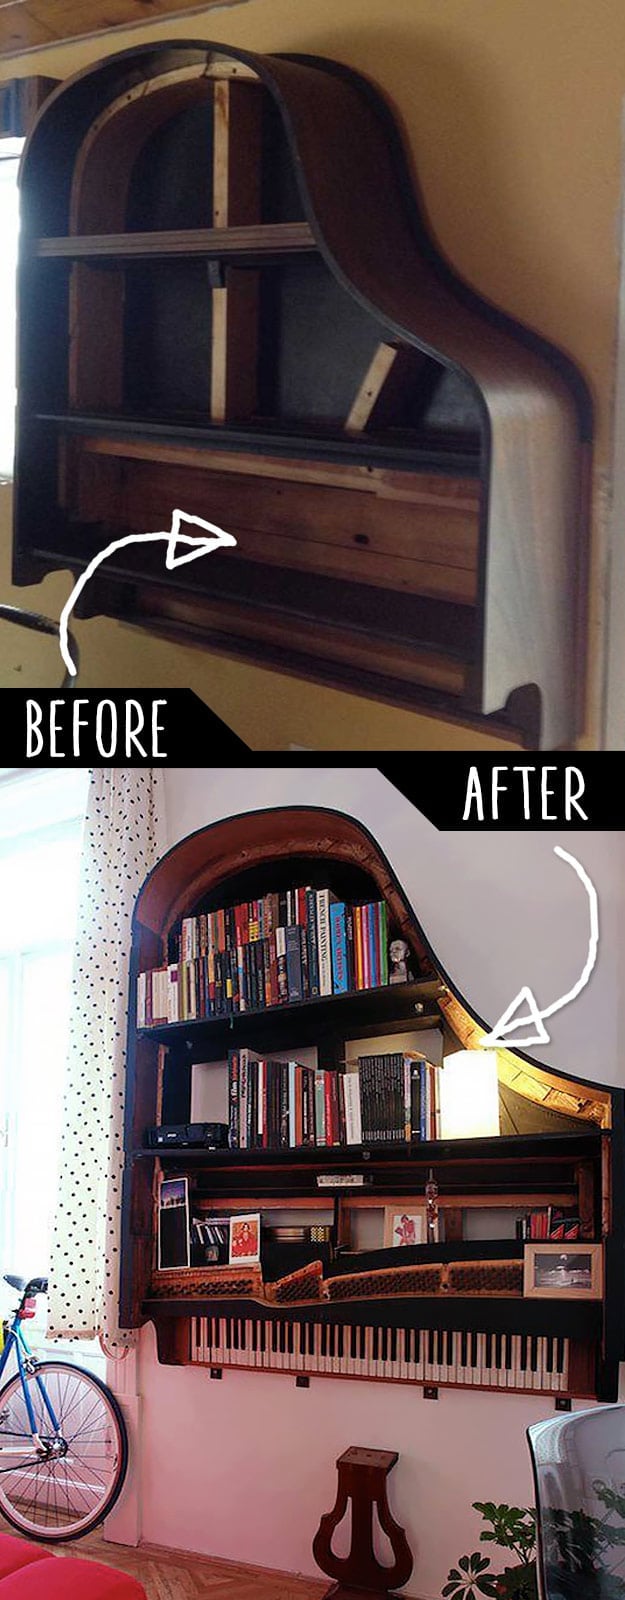 DIY Furniture Hacks | Grand Piano Bookshelf | Cool Ideas for Creative Do It Yourself Furniture Made From Things You Might Not Expect - http://diyjoy.com/diy-furniture-hacks